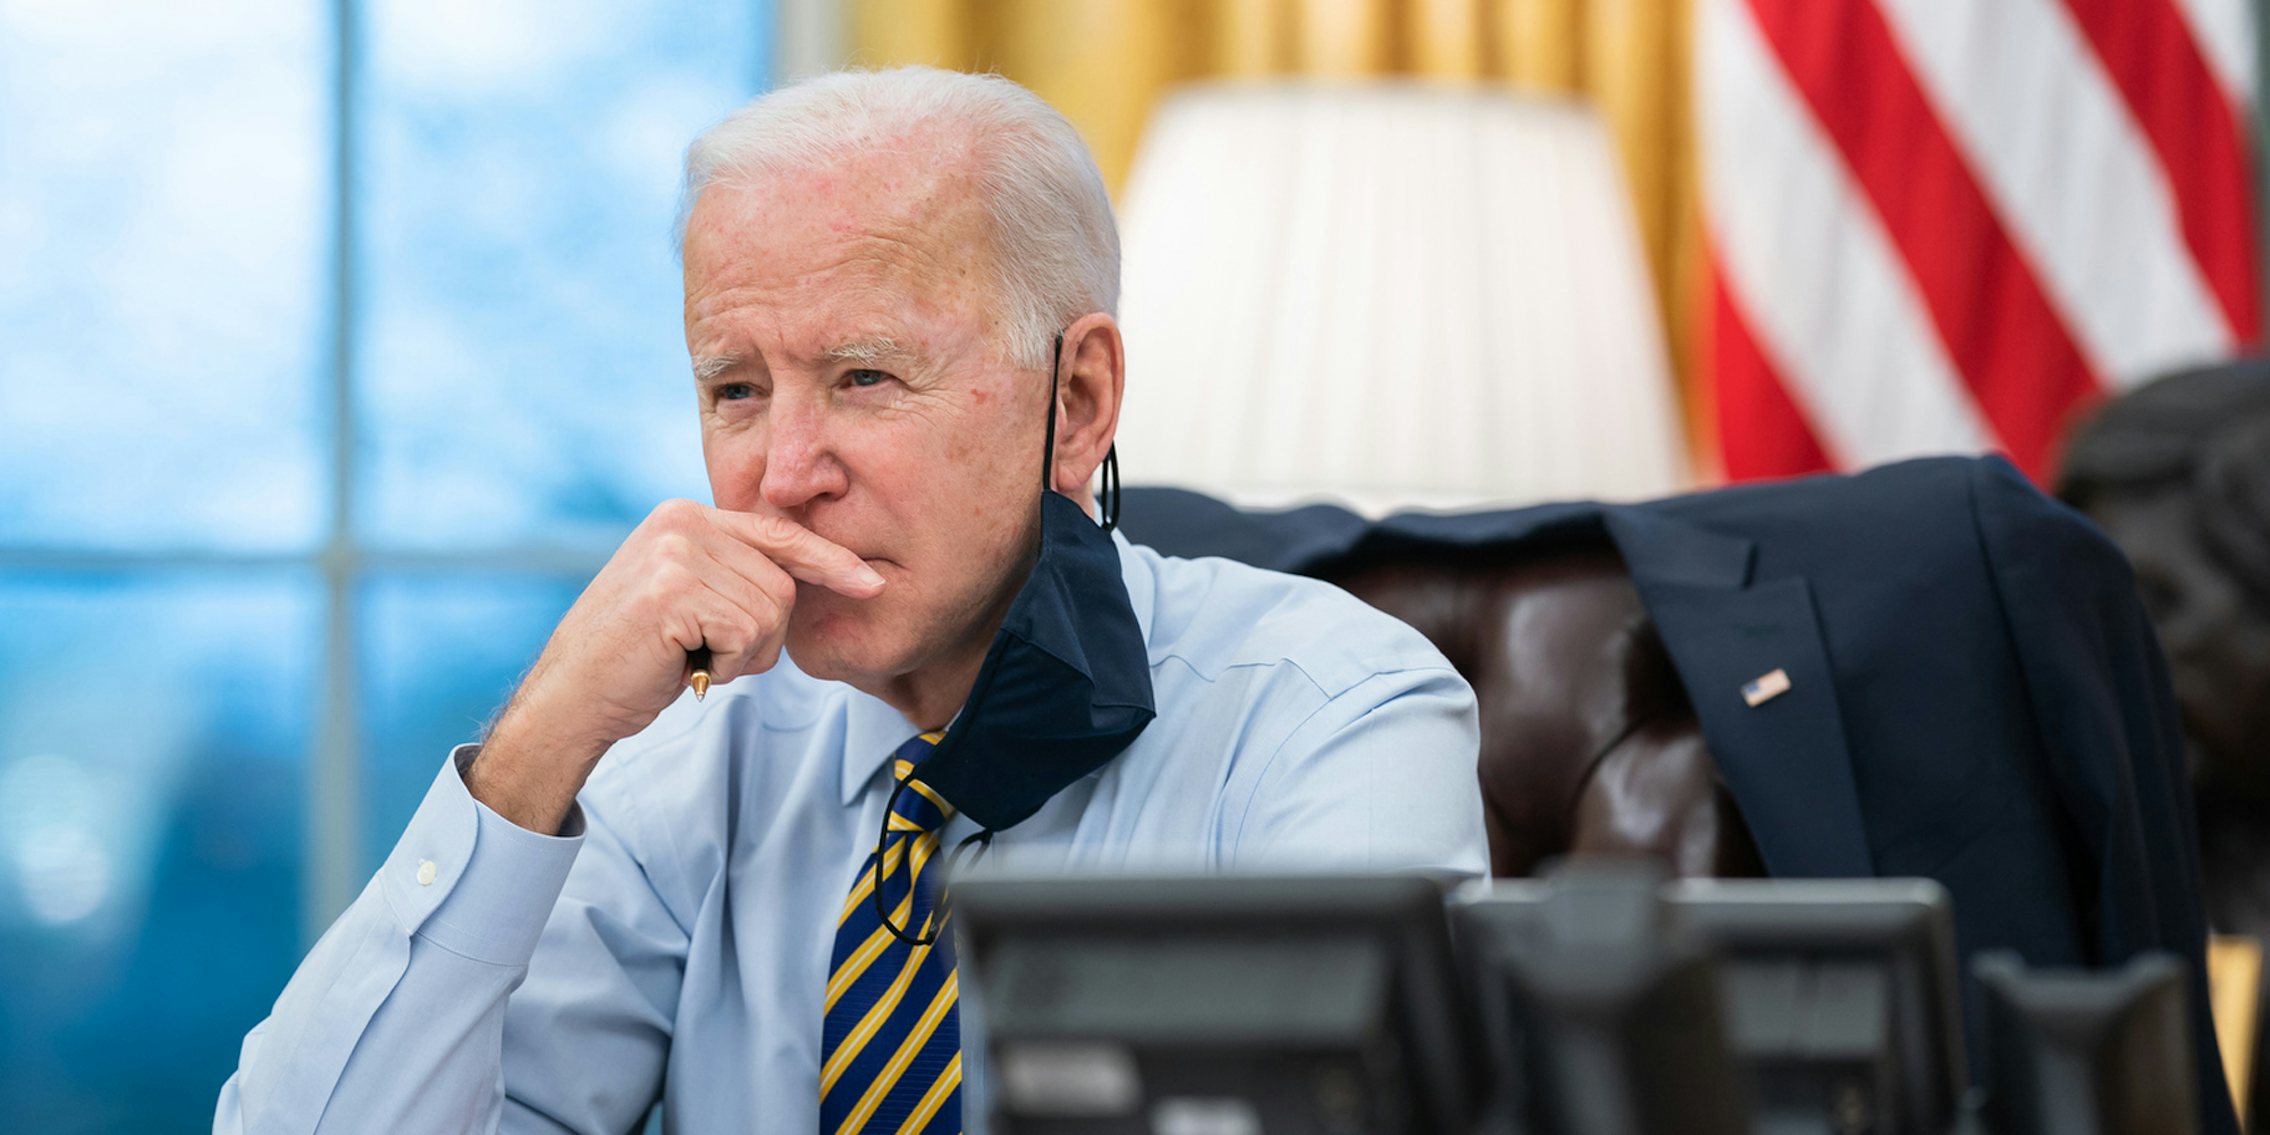 Joe Biden in the Oval Office with his hand up to his face.